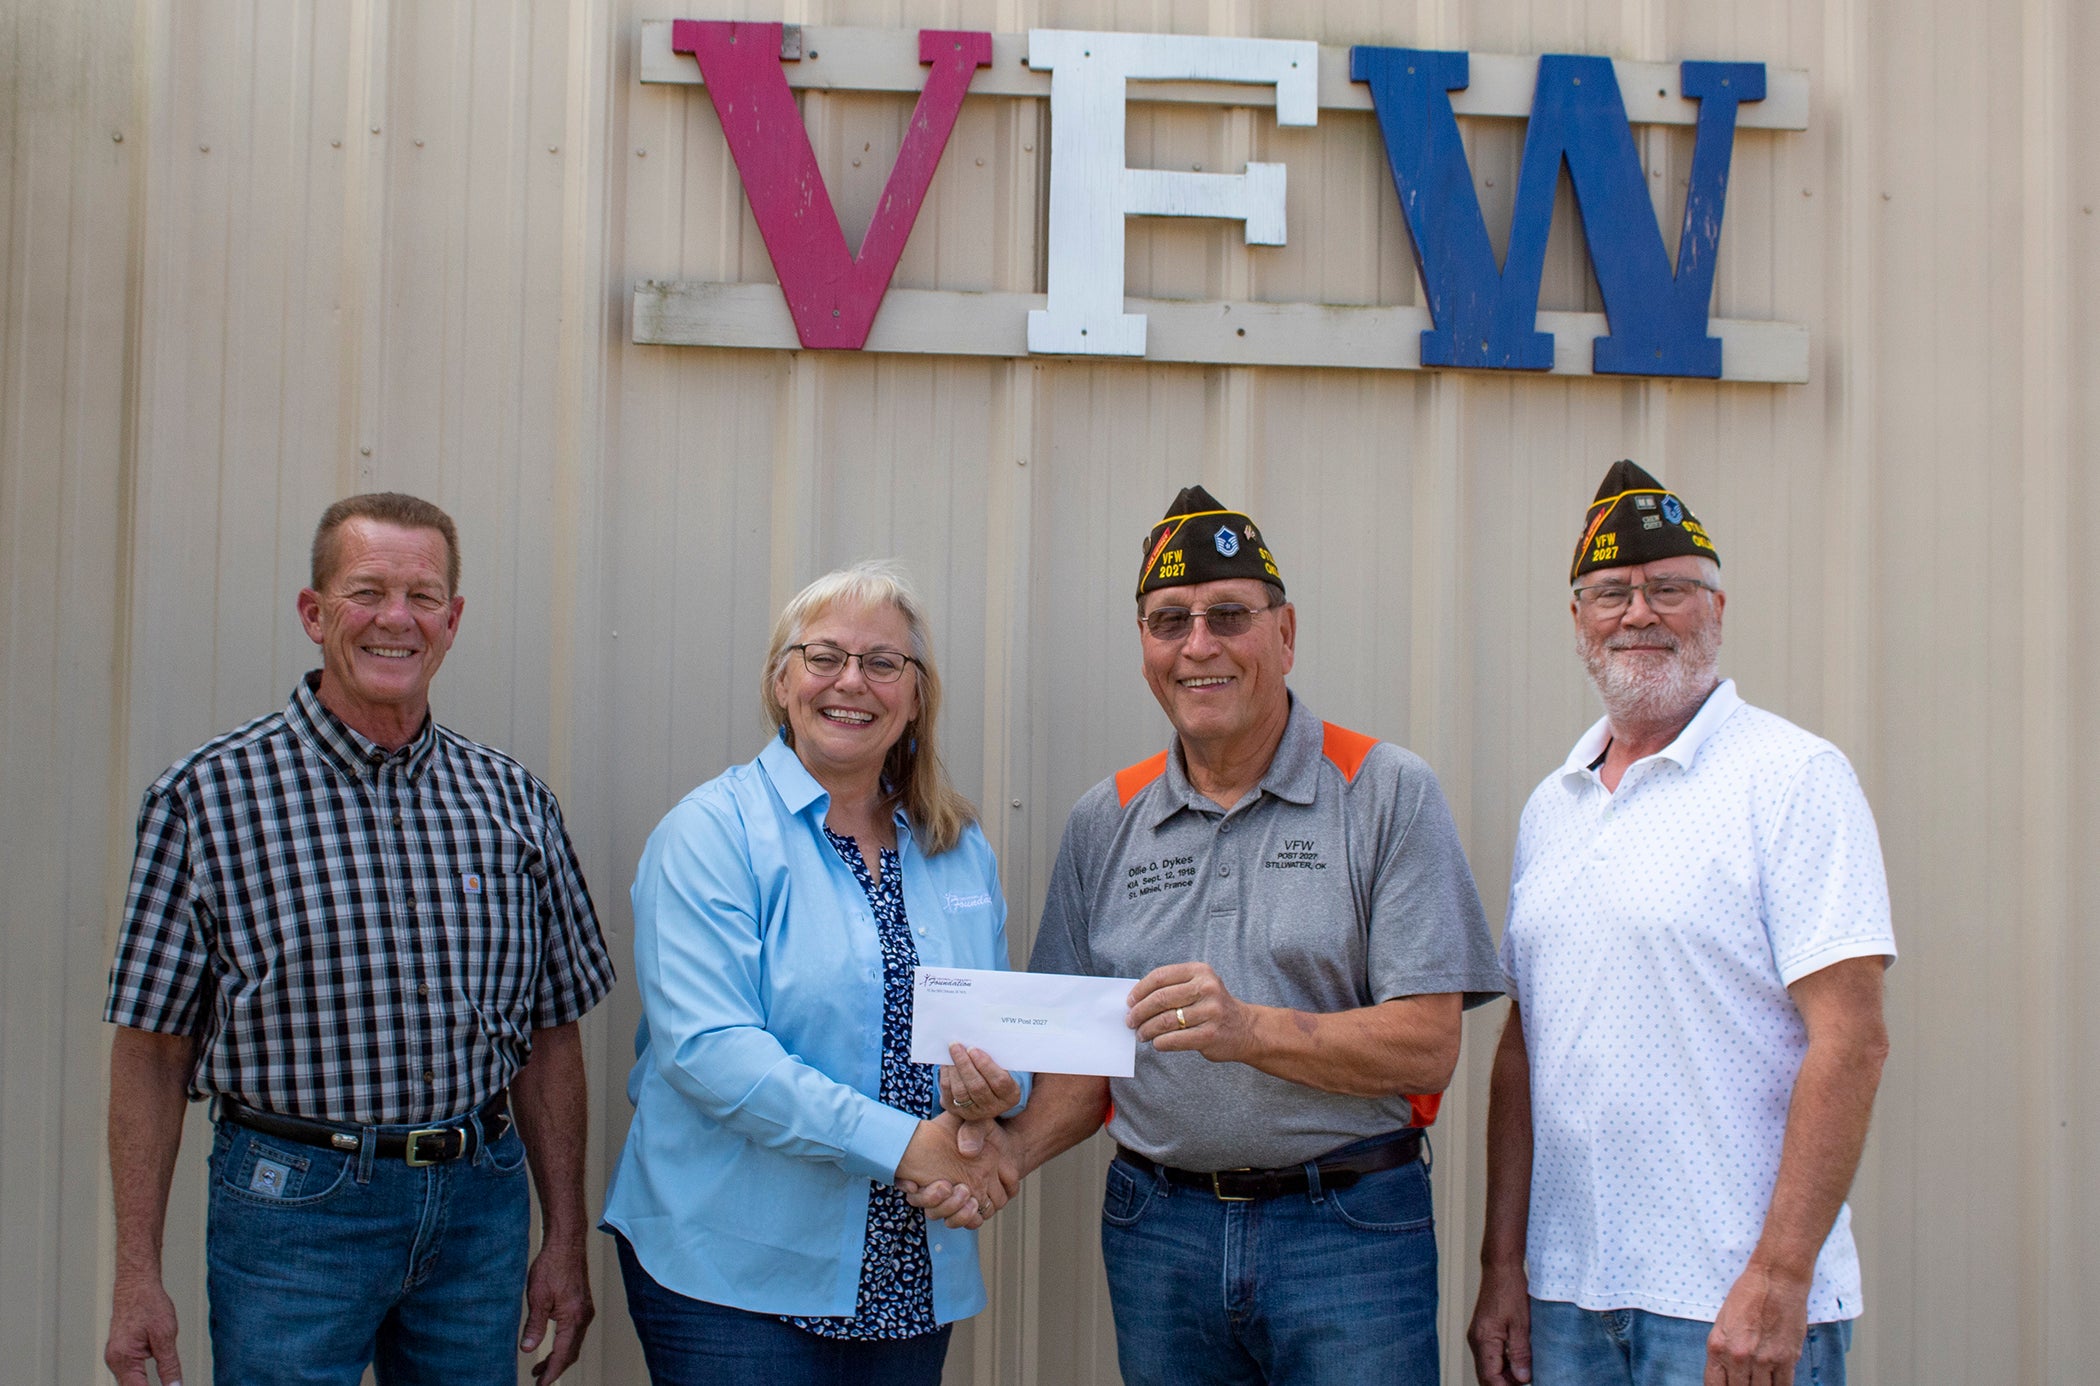 (From left to right) Central District 5 Trustee Mark Pittman and Central Community Foundation Board Member Donna Dollins present Stillwater VFW members Bill Jones and Brian Johnson with a foundation grant.